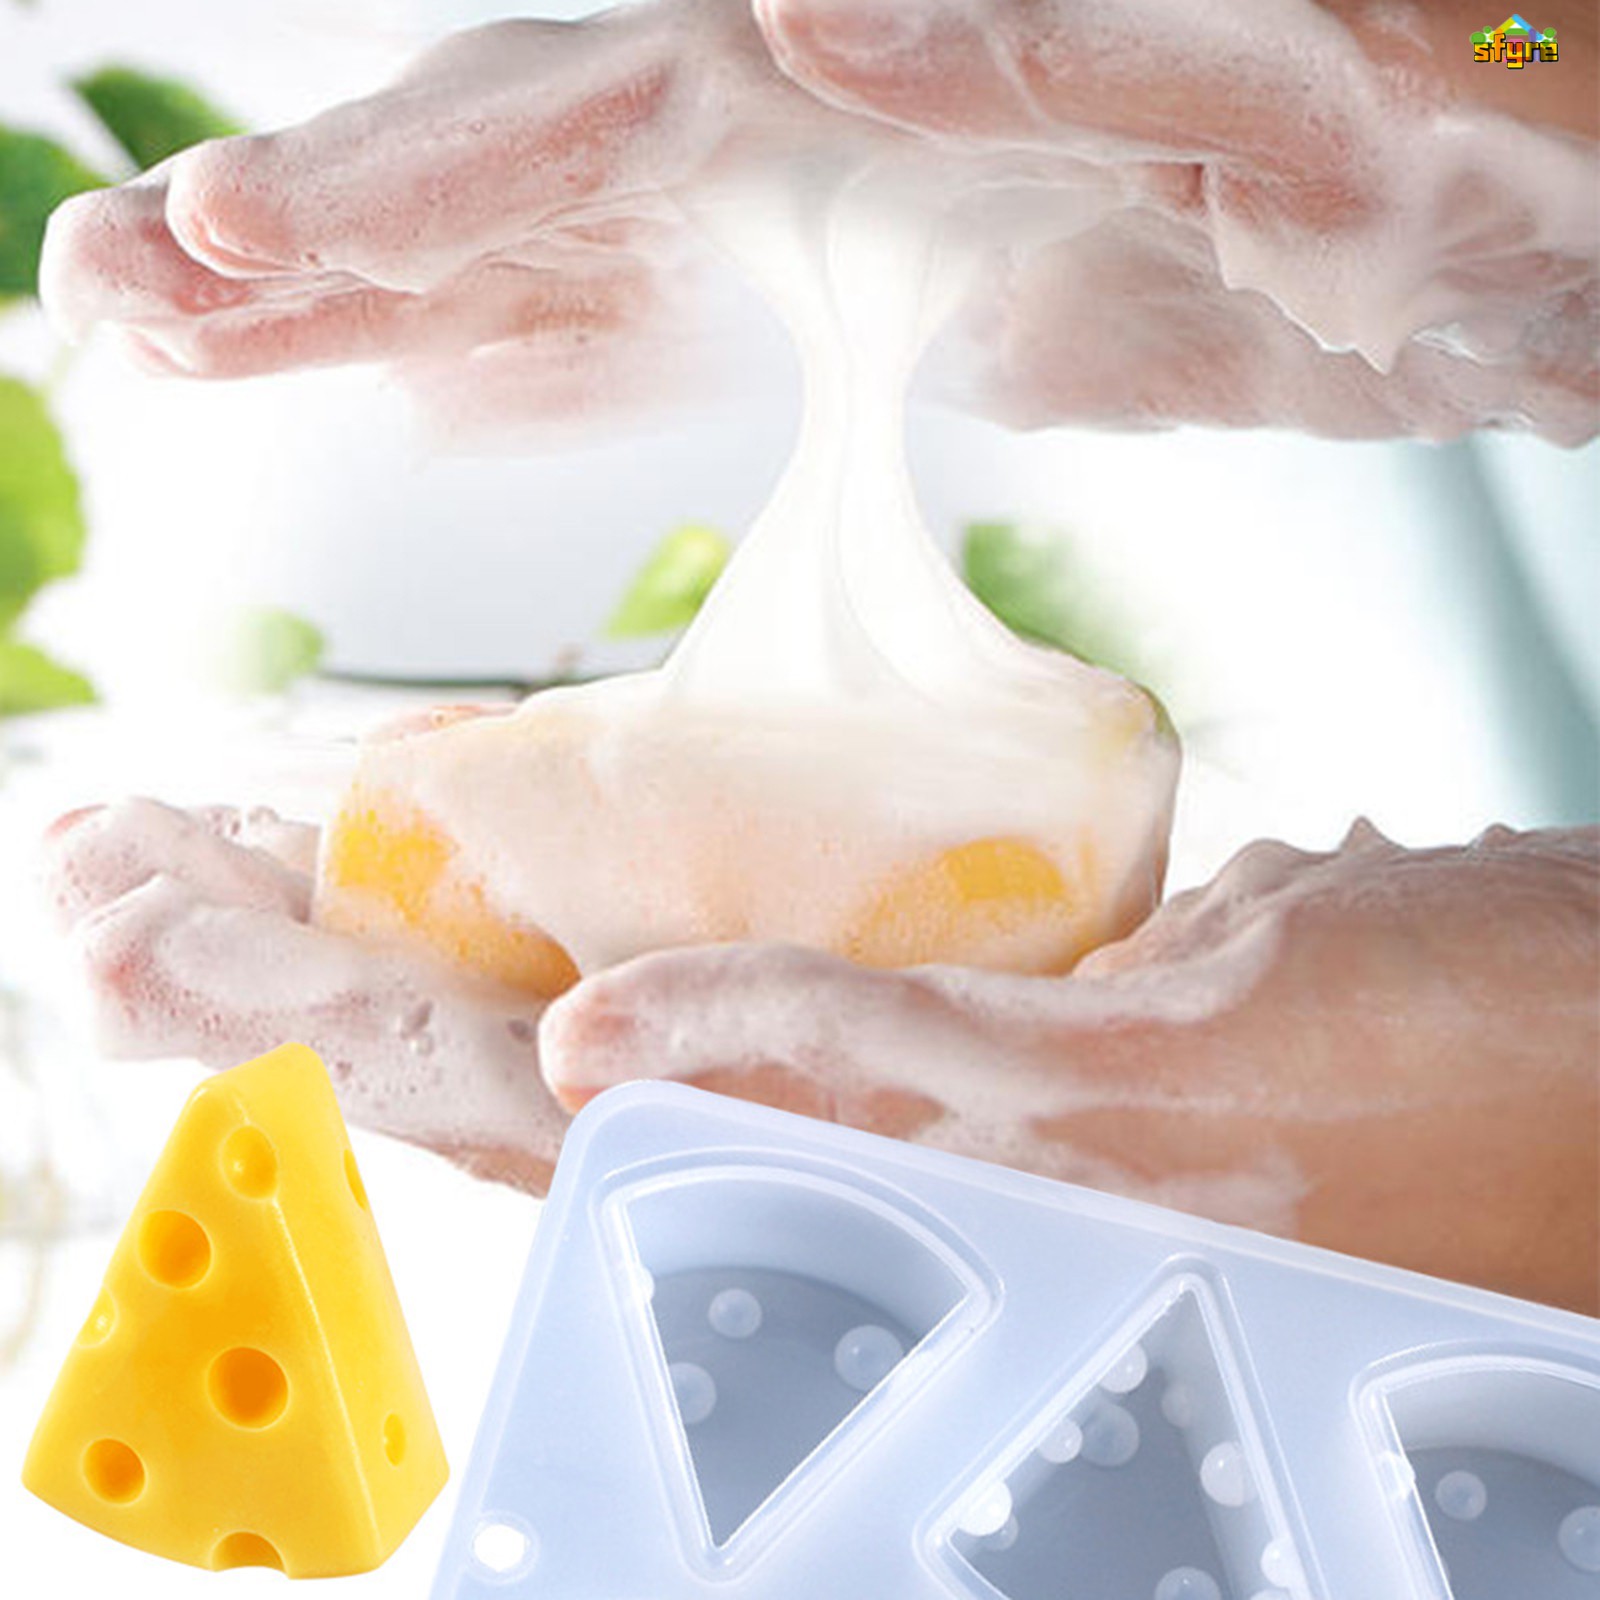 【COD】 Cheese Shape Silicone Mold 8 Grids Mousse Mold for Kitchen Baking 3D Cake Candy Cheese or Dessert